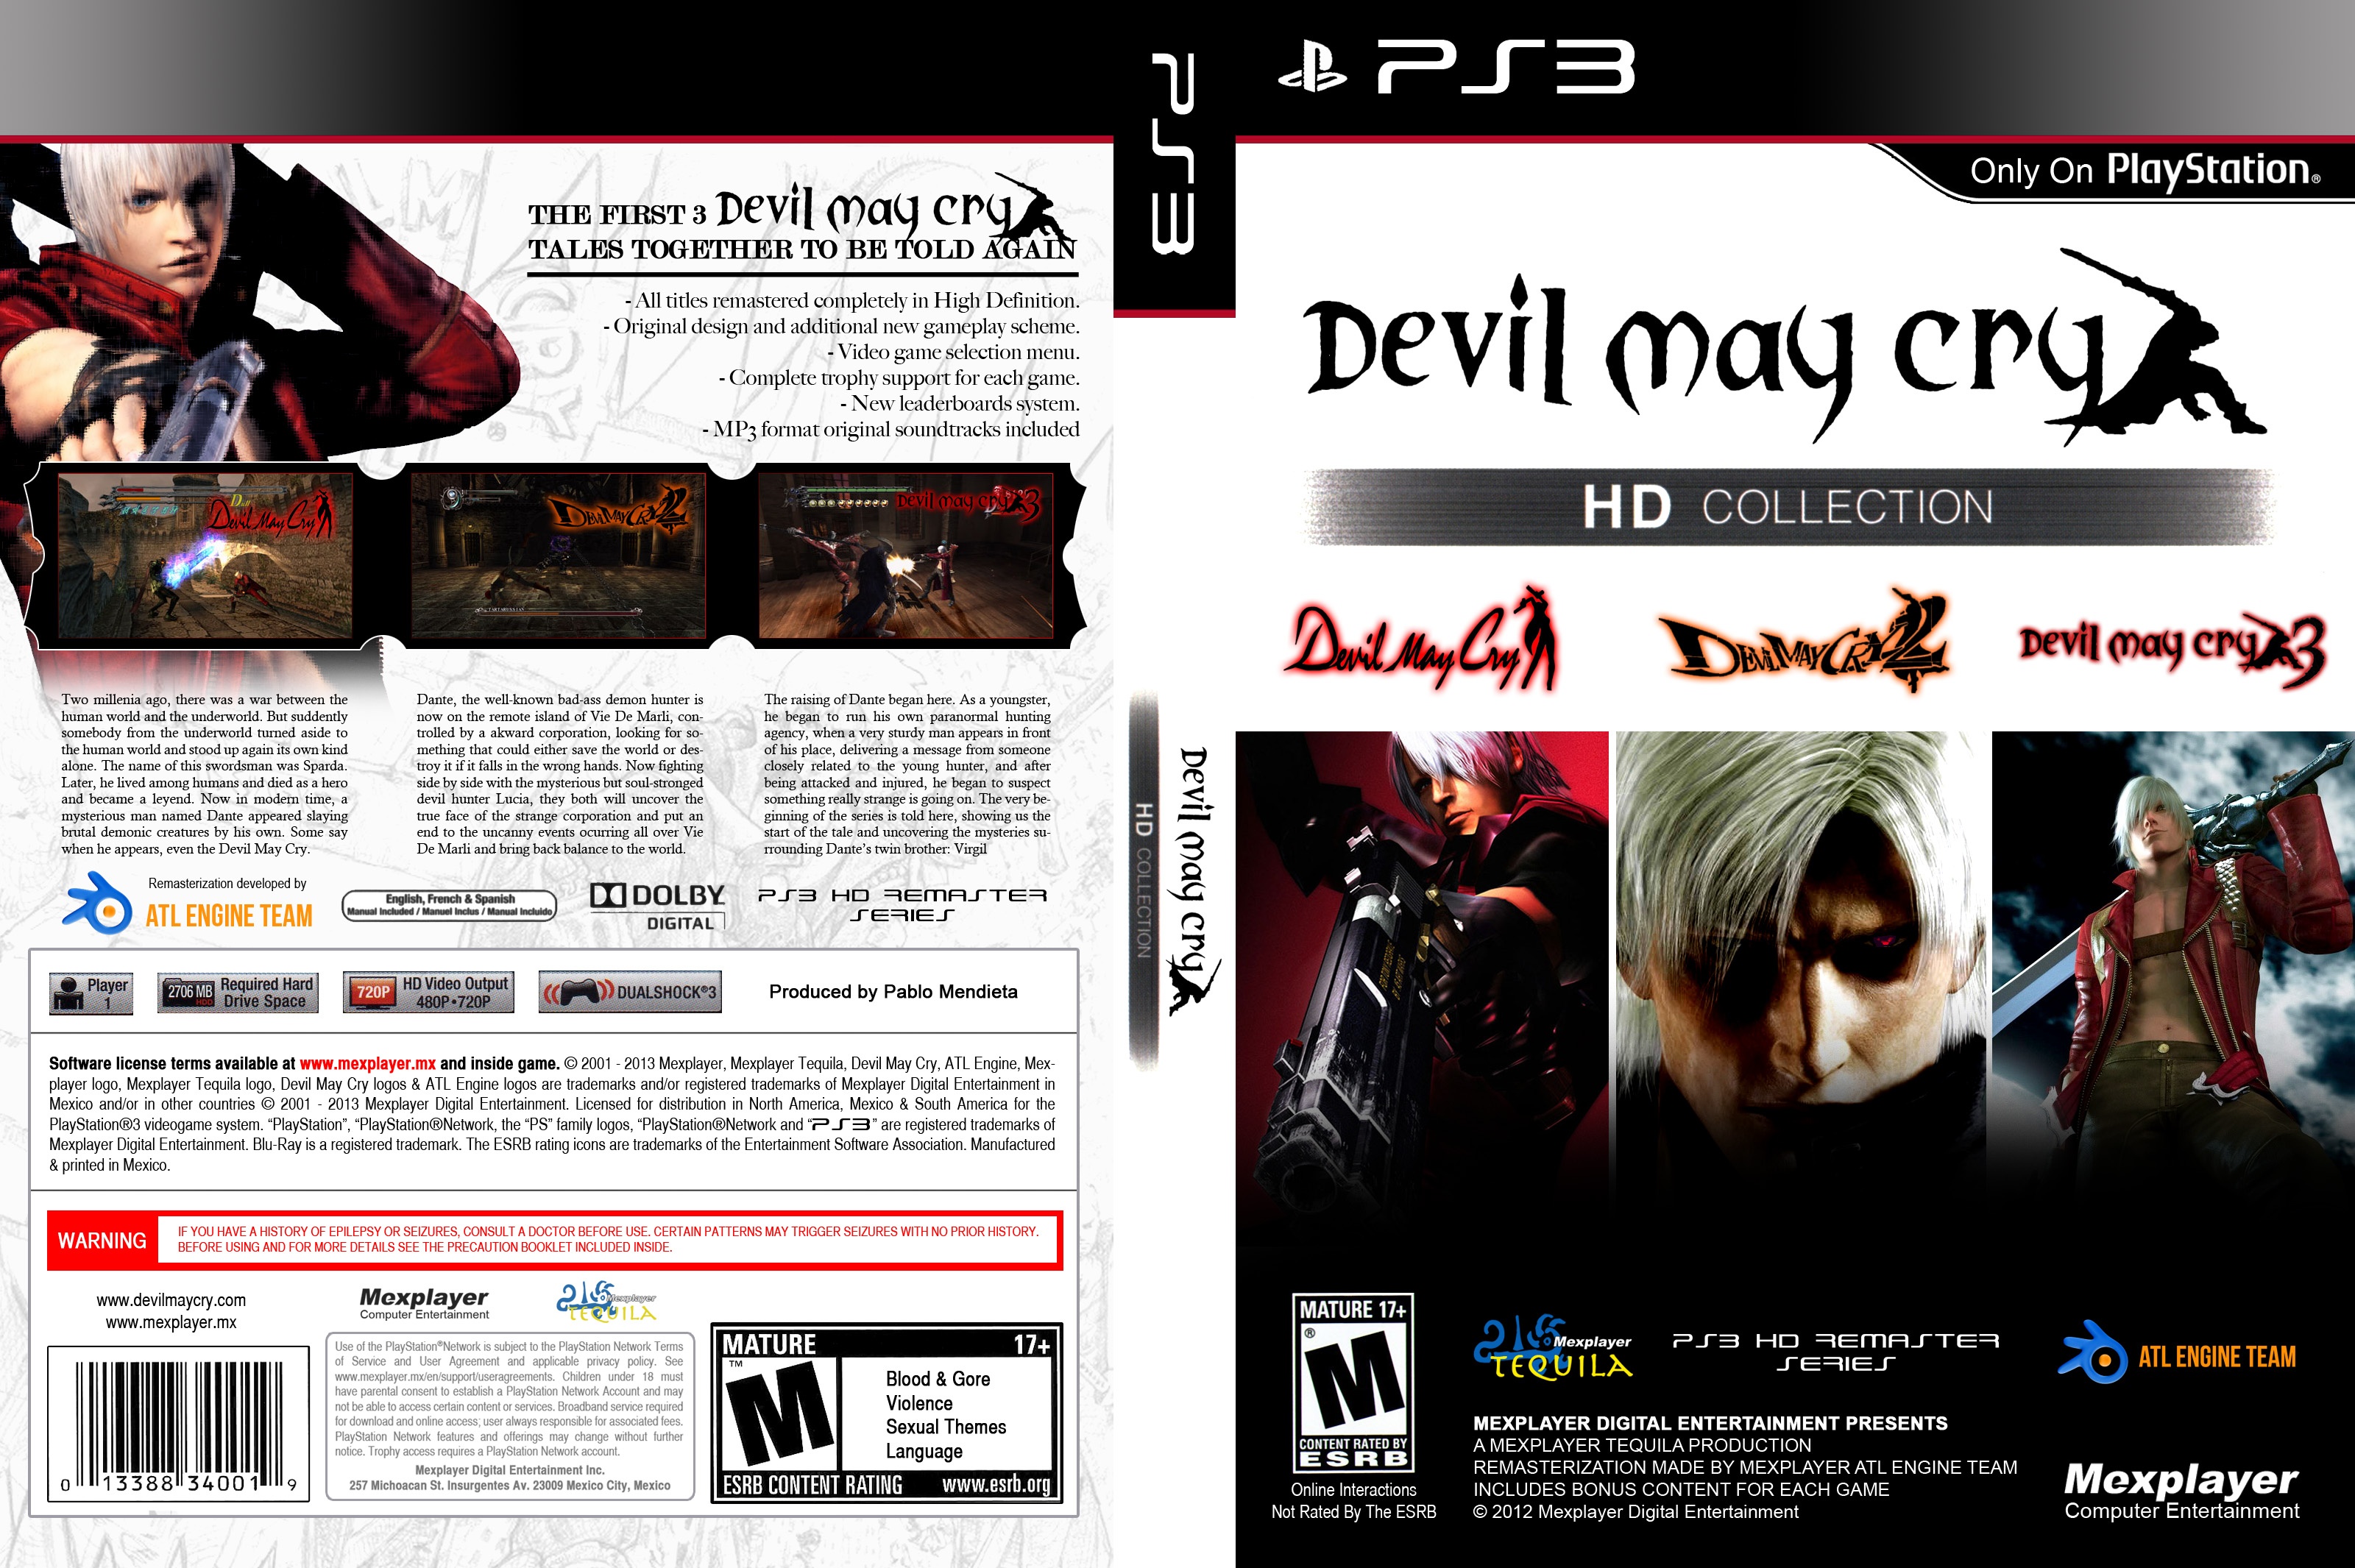 devil may cry hd collection backwards compatible